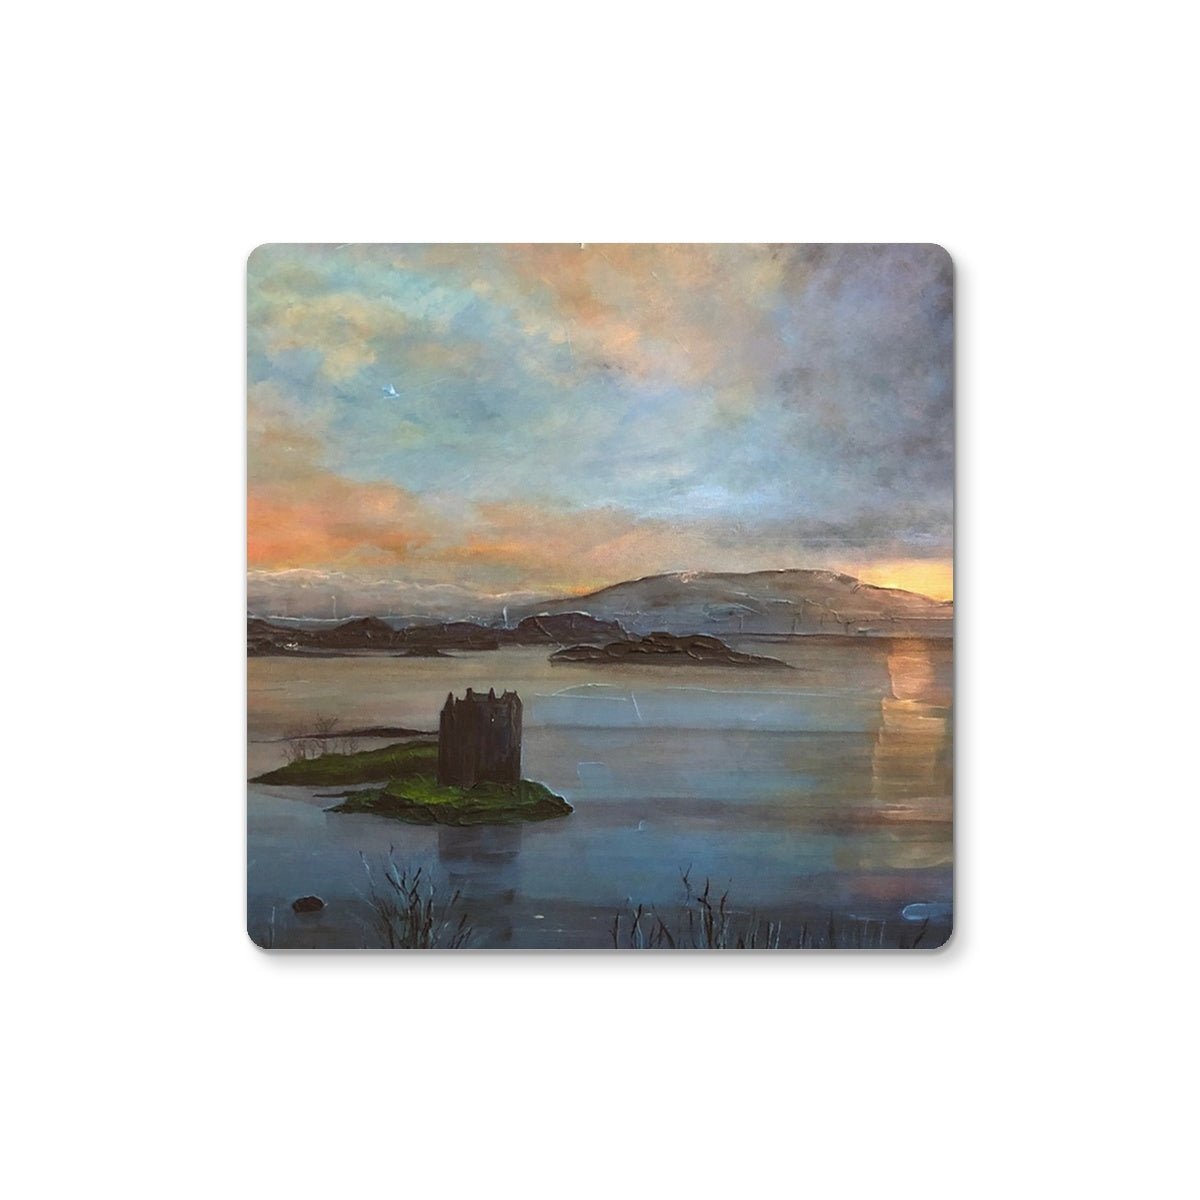 Castle Stalker Twilight Art Gift Coaster-Coasters-Scottish Castles Art Gallery-2 Coasters-Paintings, Prints, Homeware, Art Gifts From Scotland By Scottish Artist Kevin Hunter